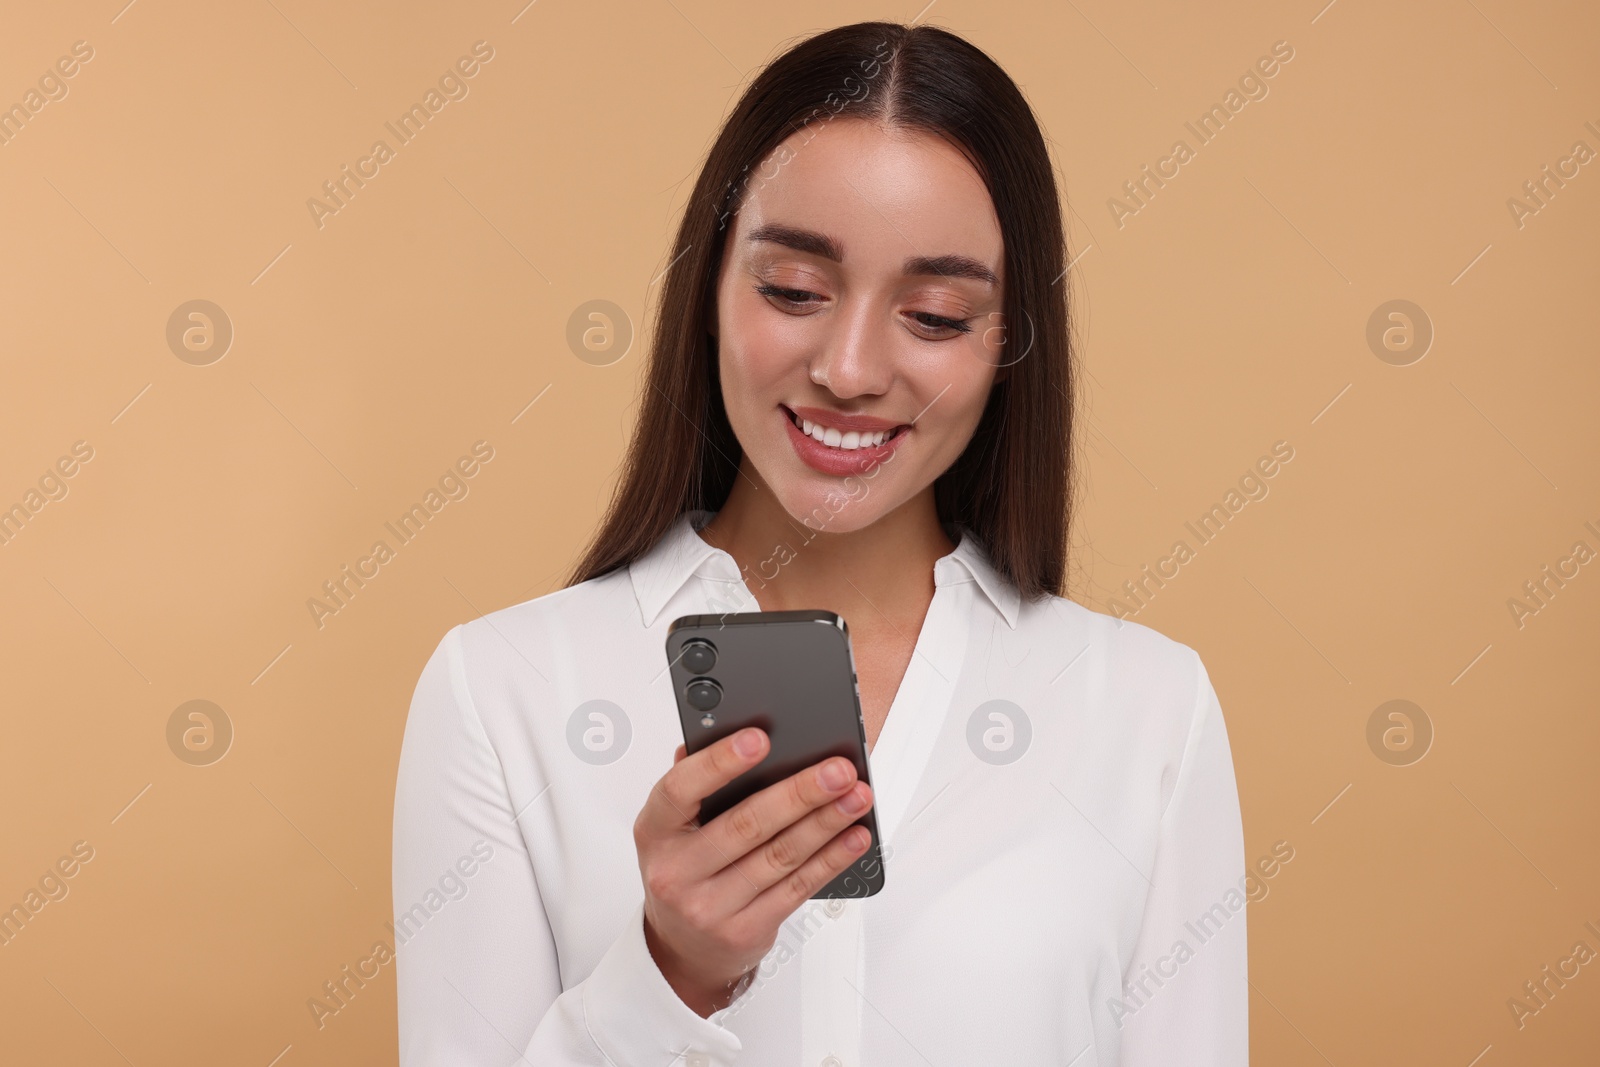 Photo of Happy young woman looking at smartphone on beige background